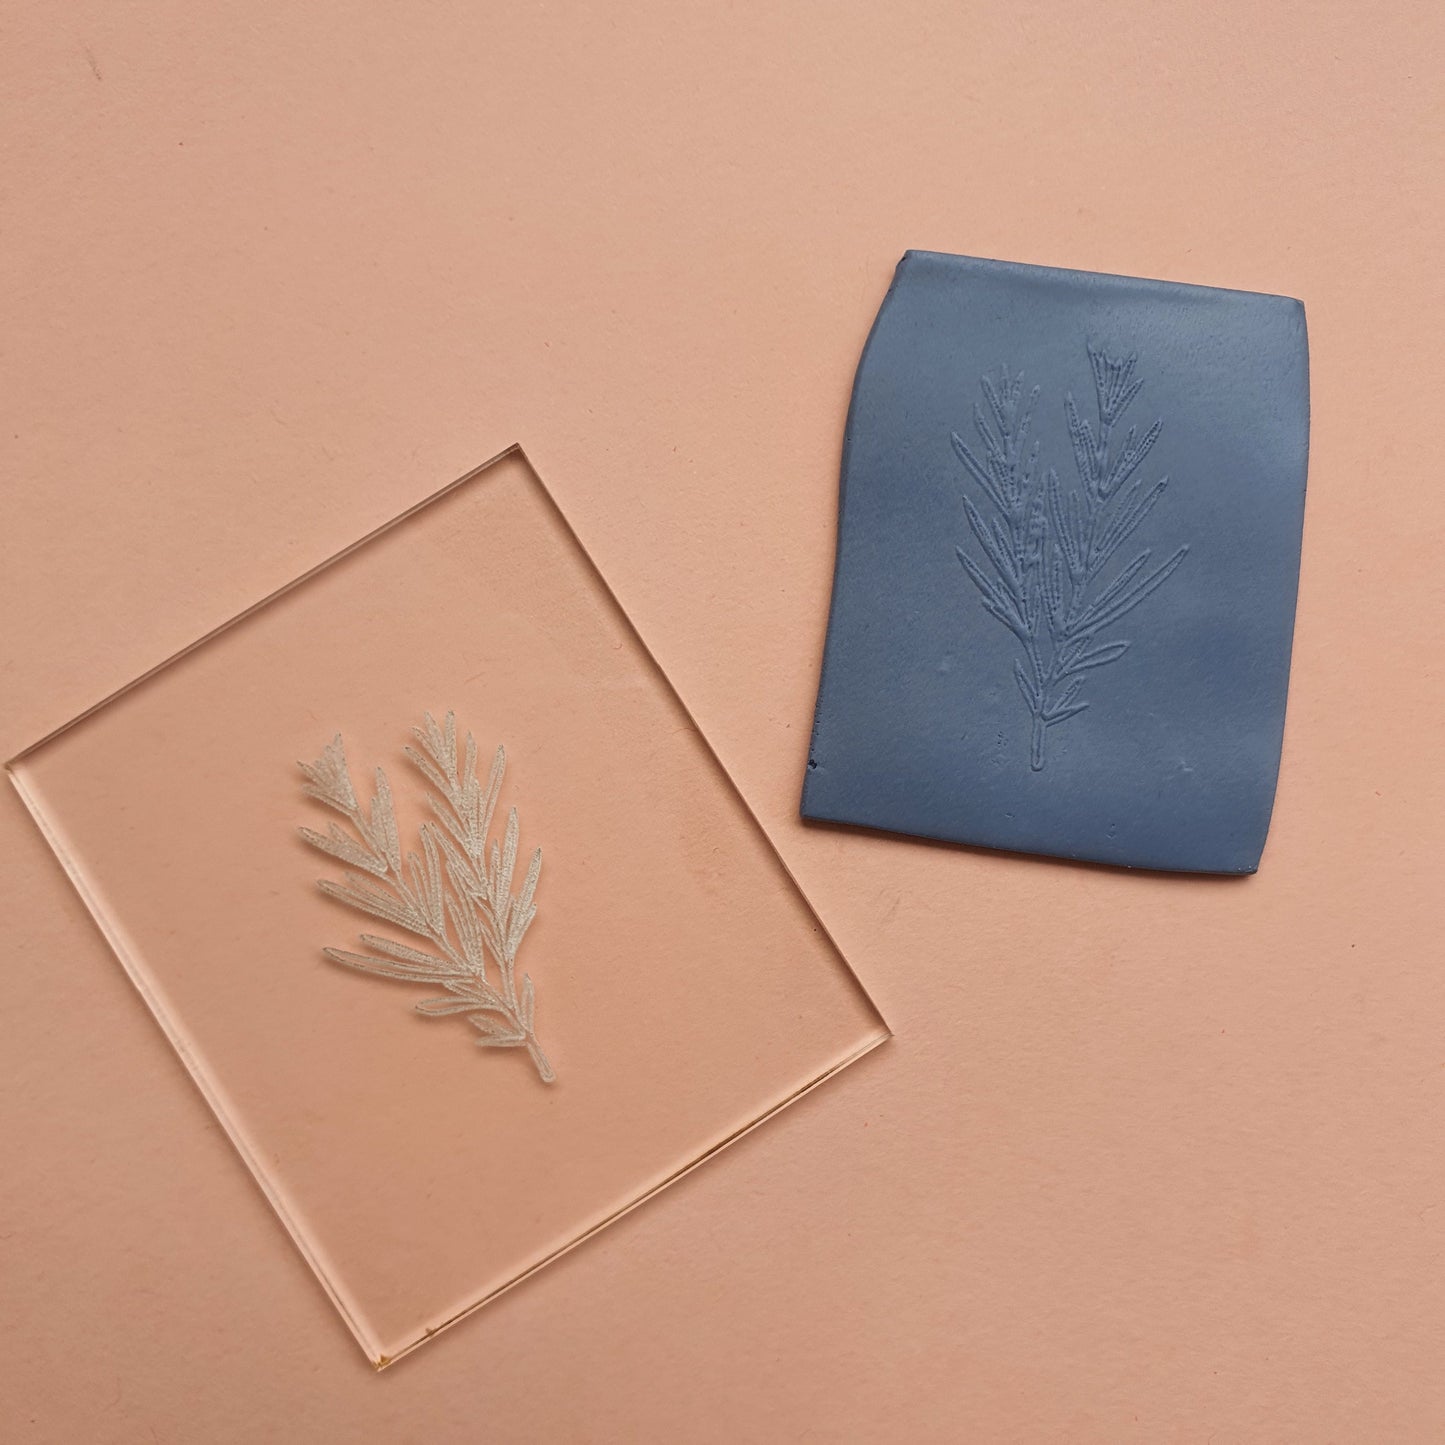 Embossing stamp for polymer clay "Rosemary" Floral texture plate Flower debossing stamp Acrylic stamps - Luxy Kraft